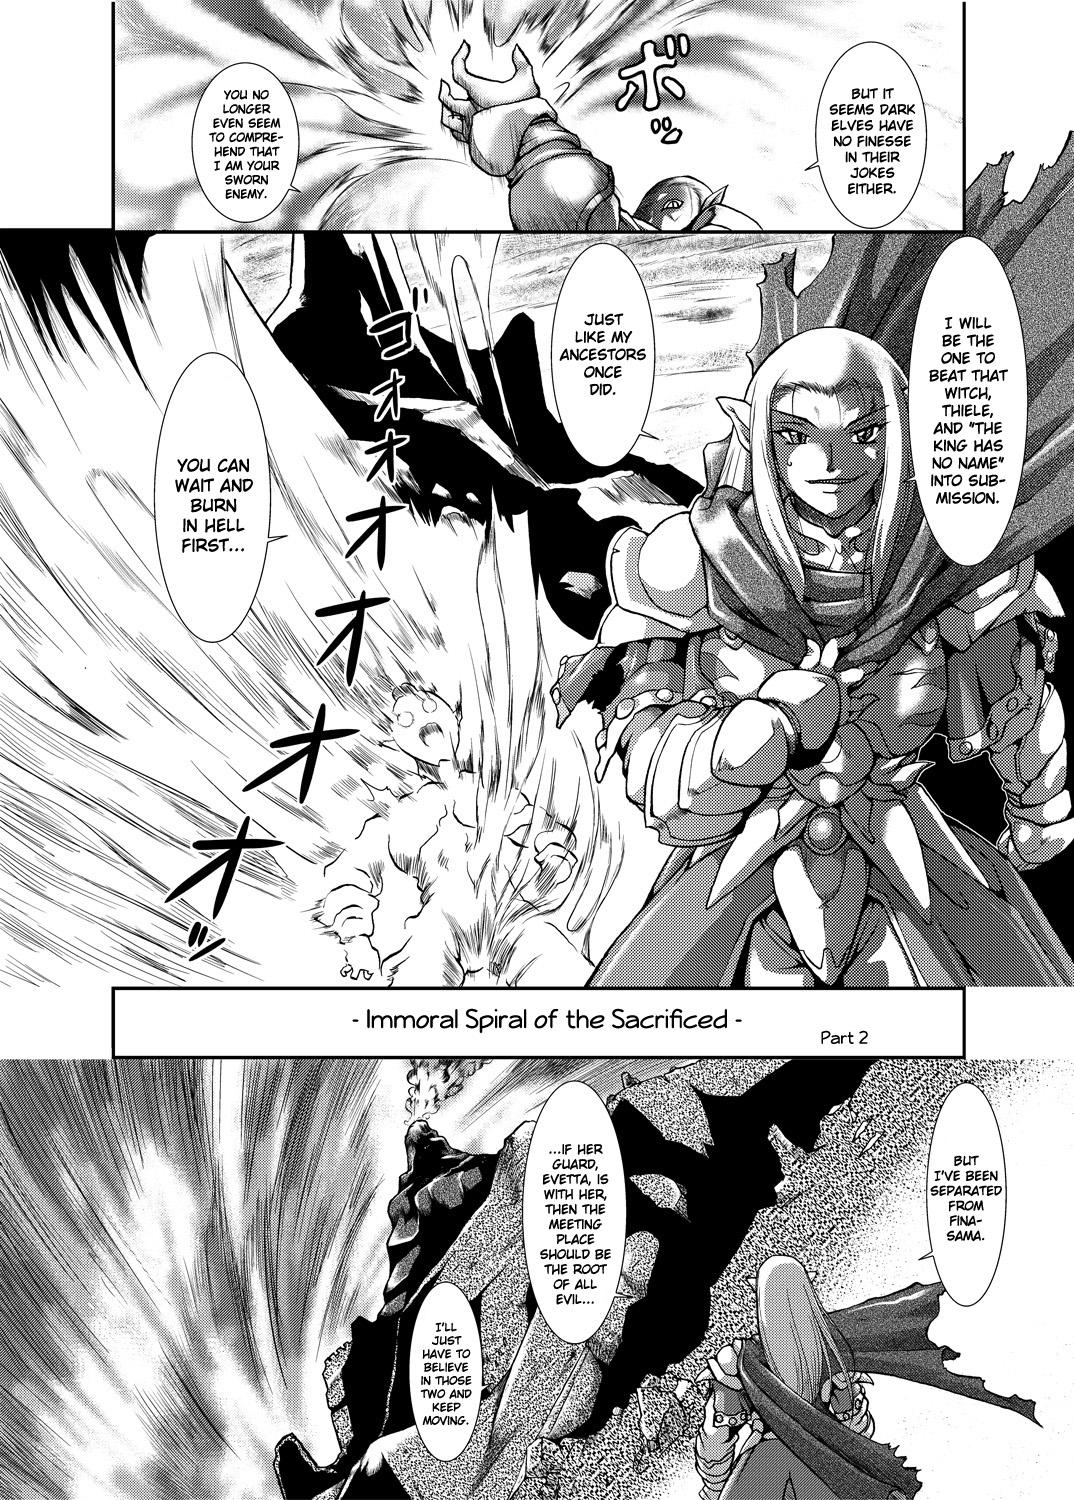 Orgasmus Kakugee Zanmai 7 | Spiral of Conflict 2 - Chaos breaker Gay Party - Page 5